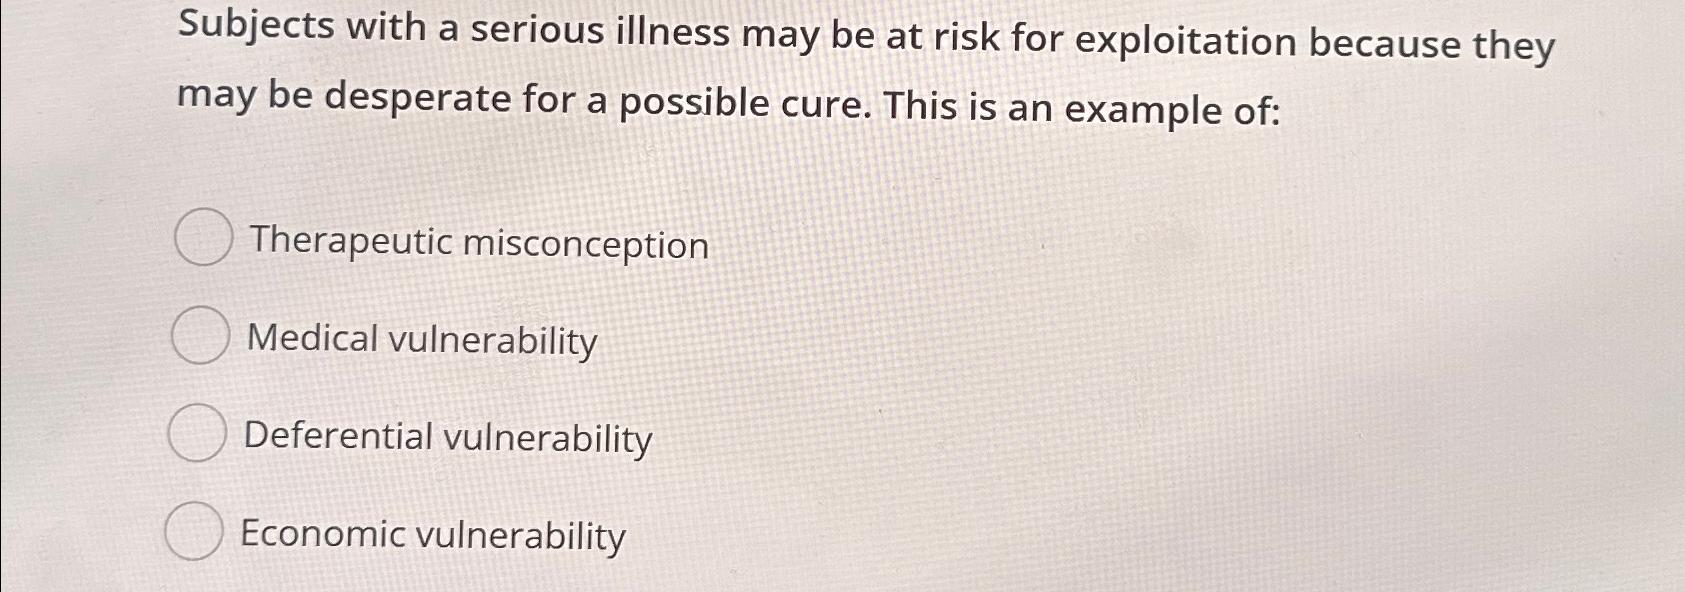 Subjects with a serious illness may be at risk for exploitation because they may be desperate for a possible